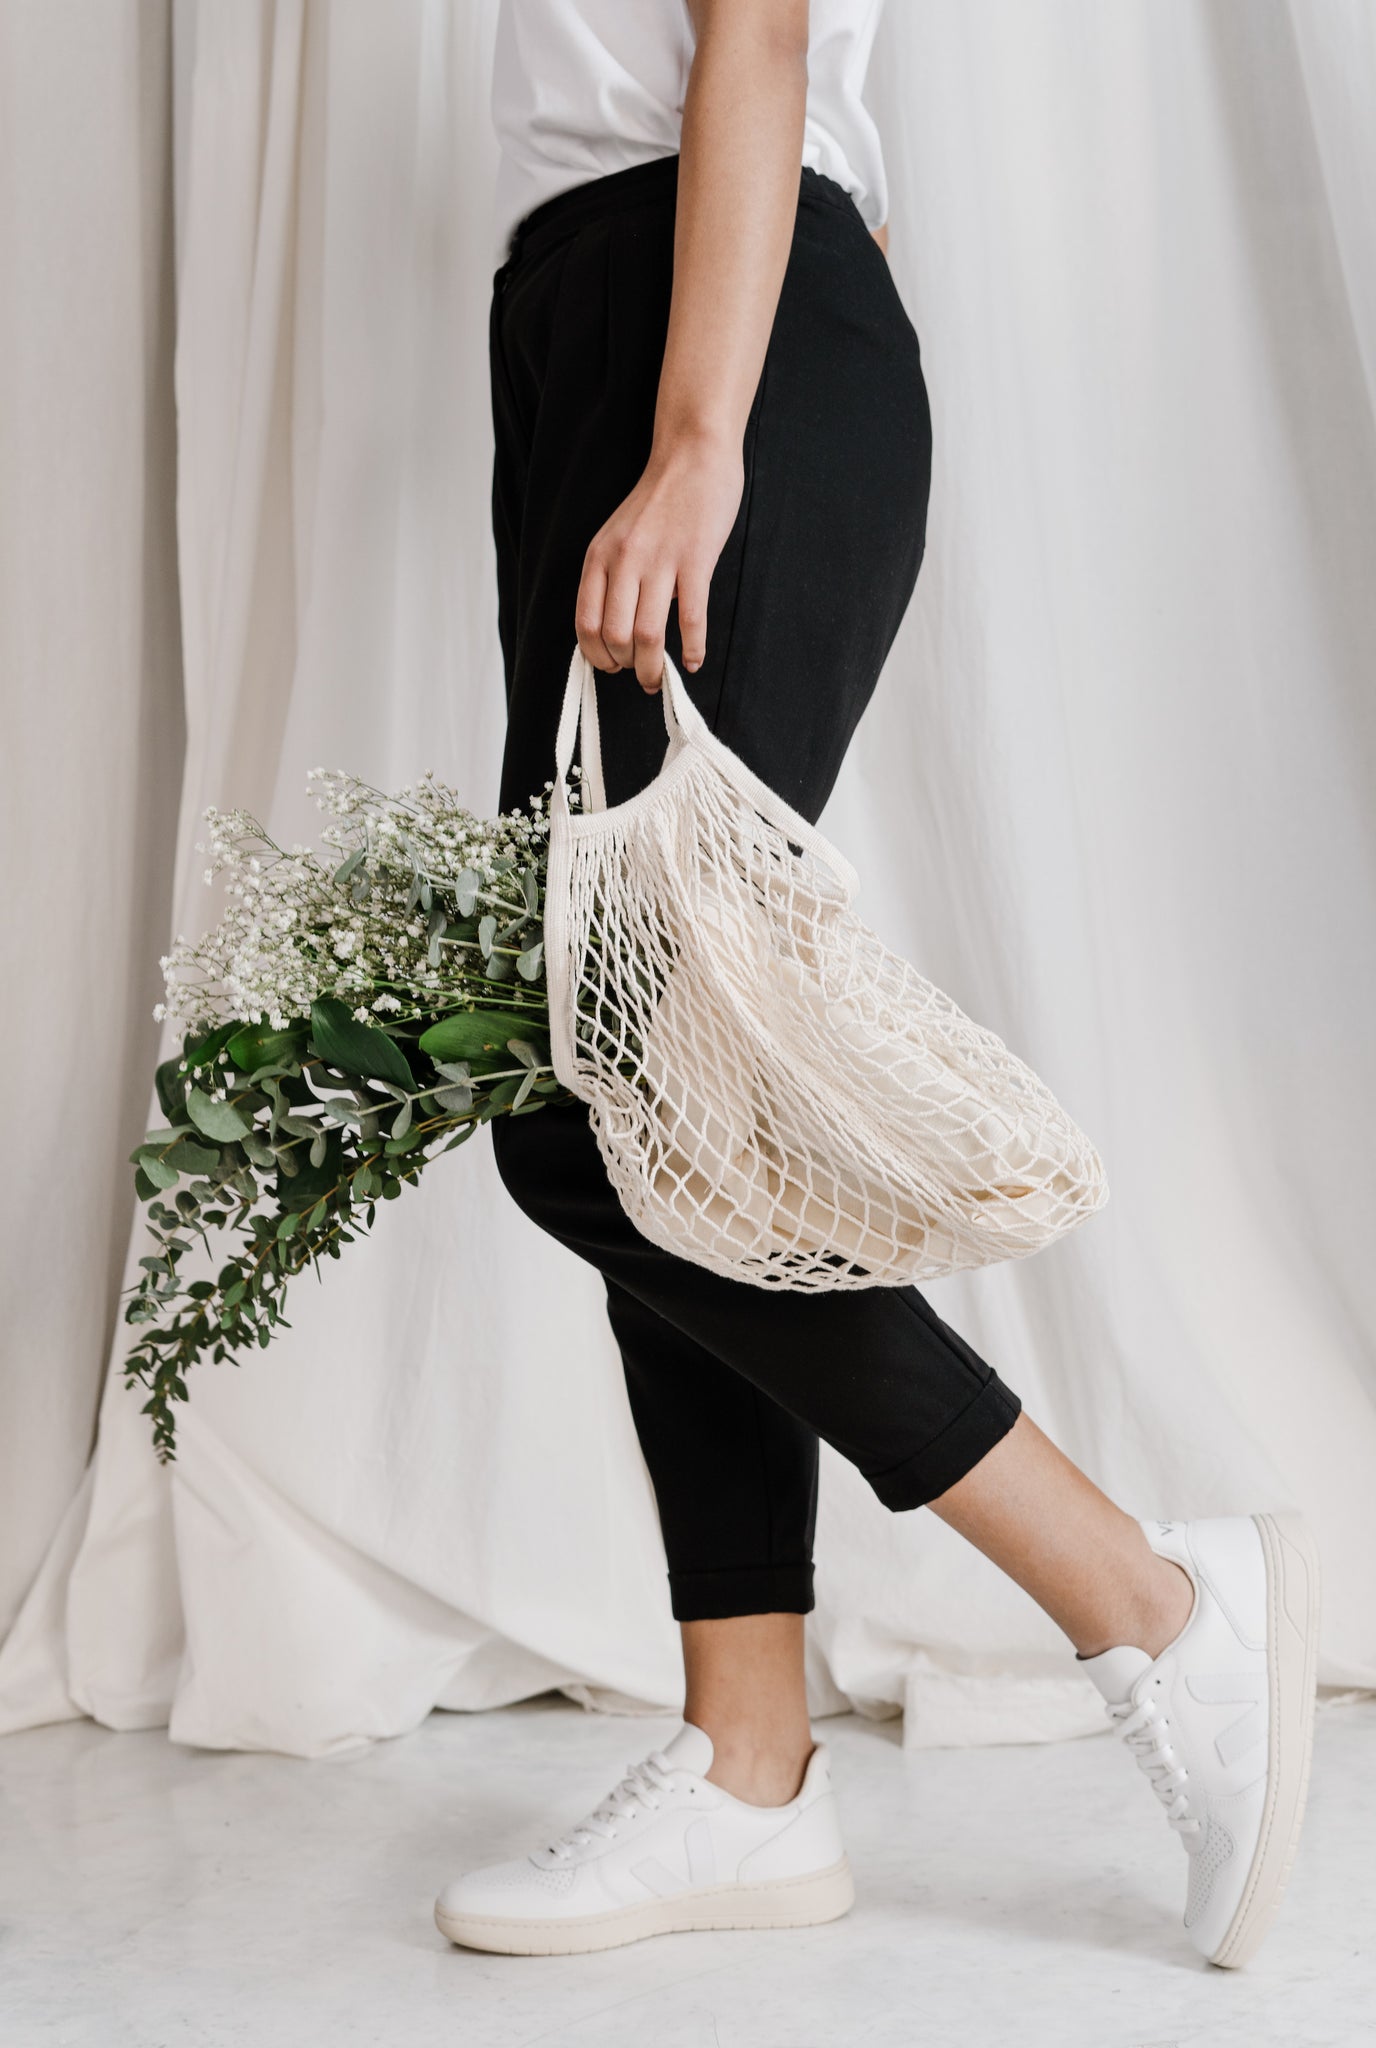 The Best French Market Net bag – How to Use It!